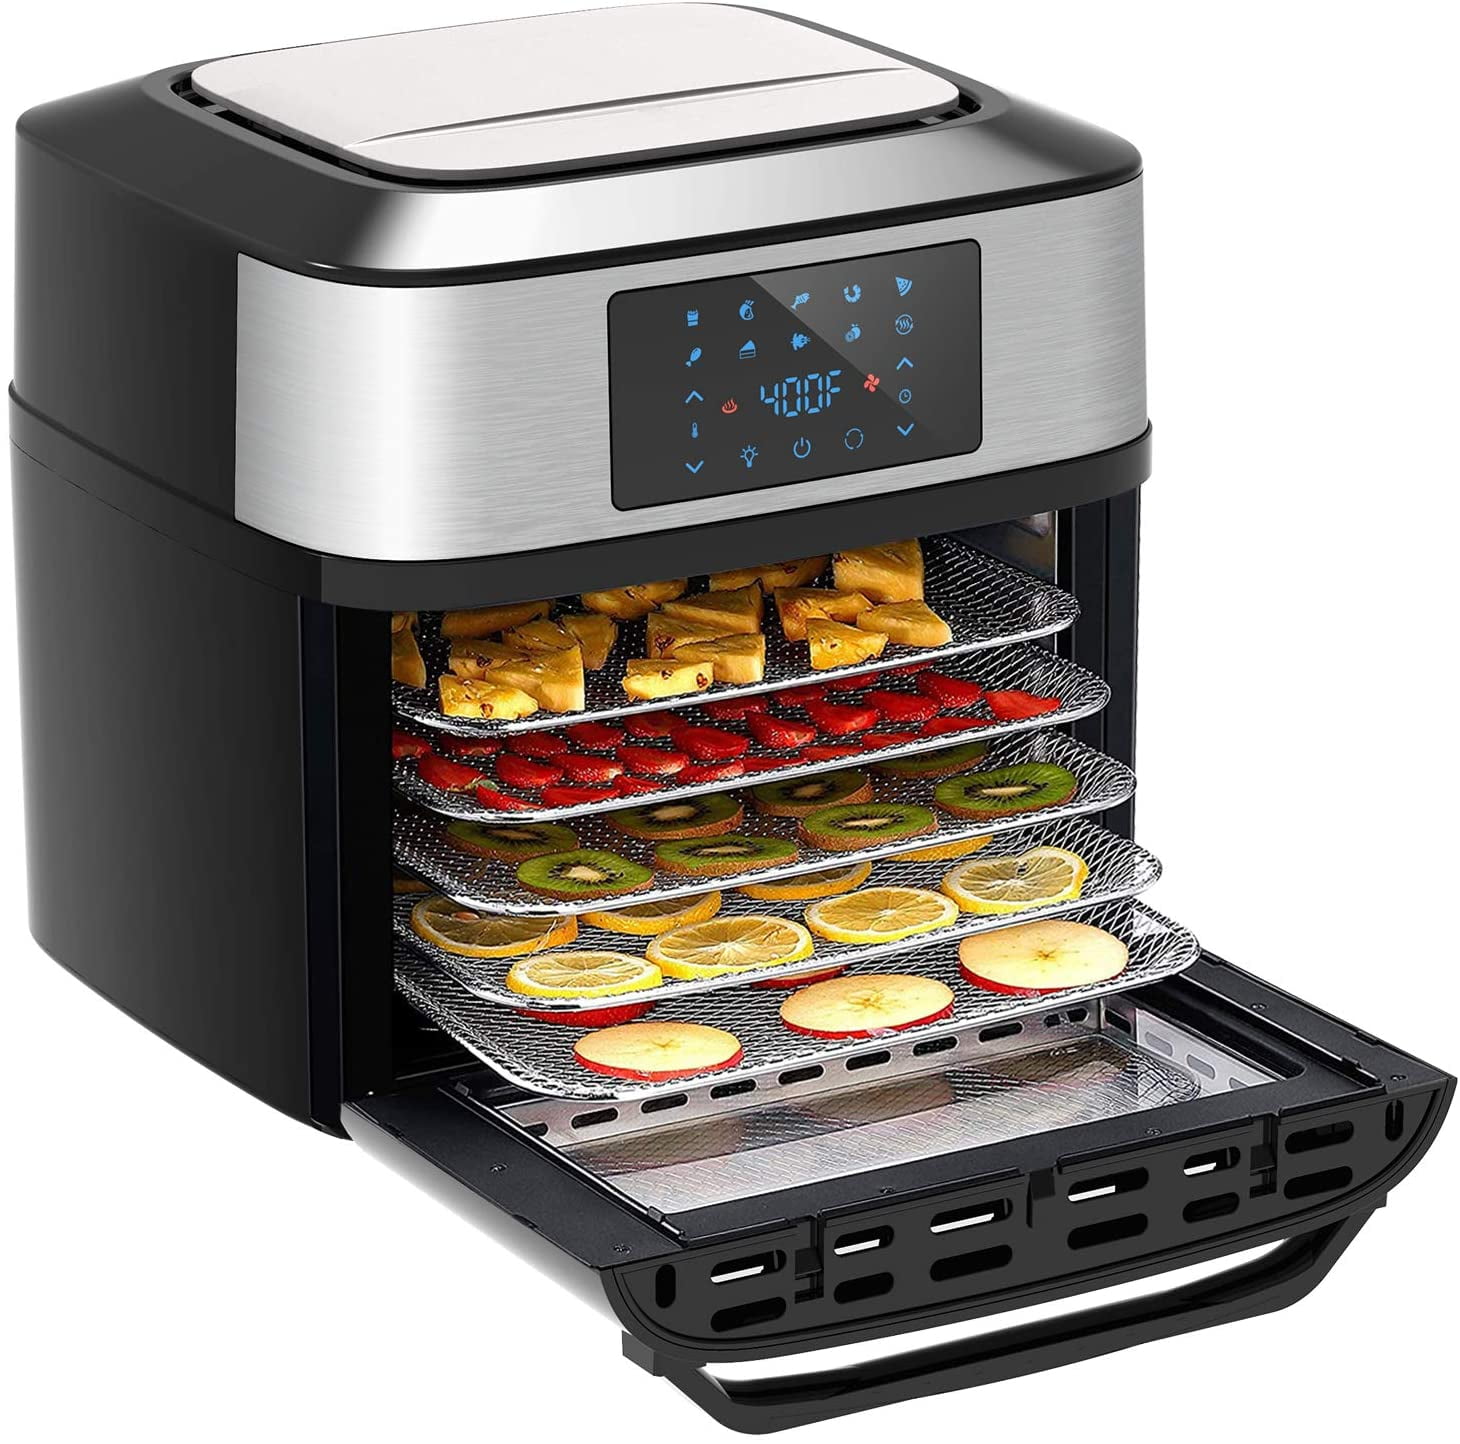 12-in-1 Oven Air Fryer Combo, Convection Toaster With Dehydrator